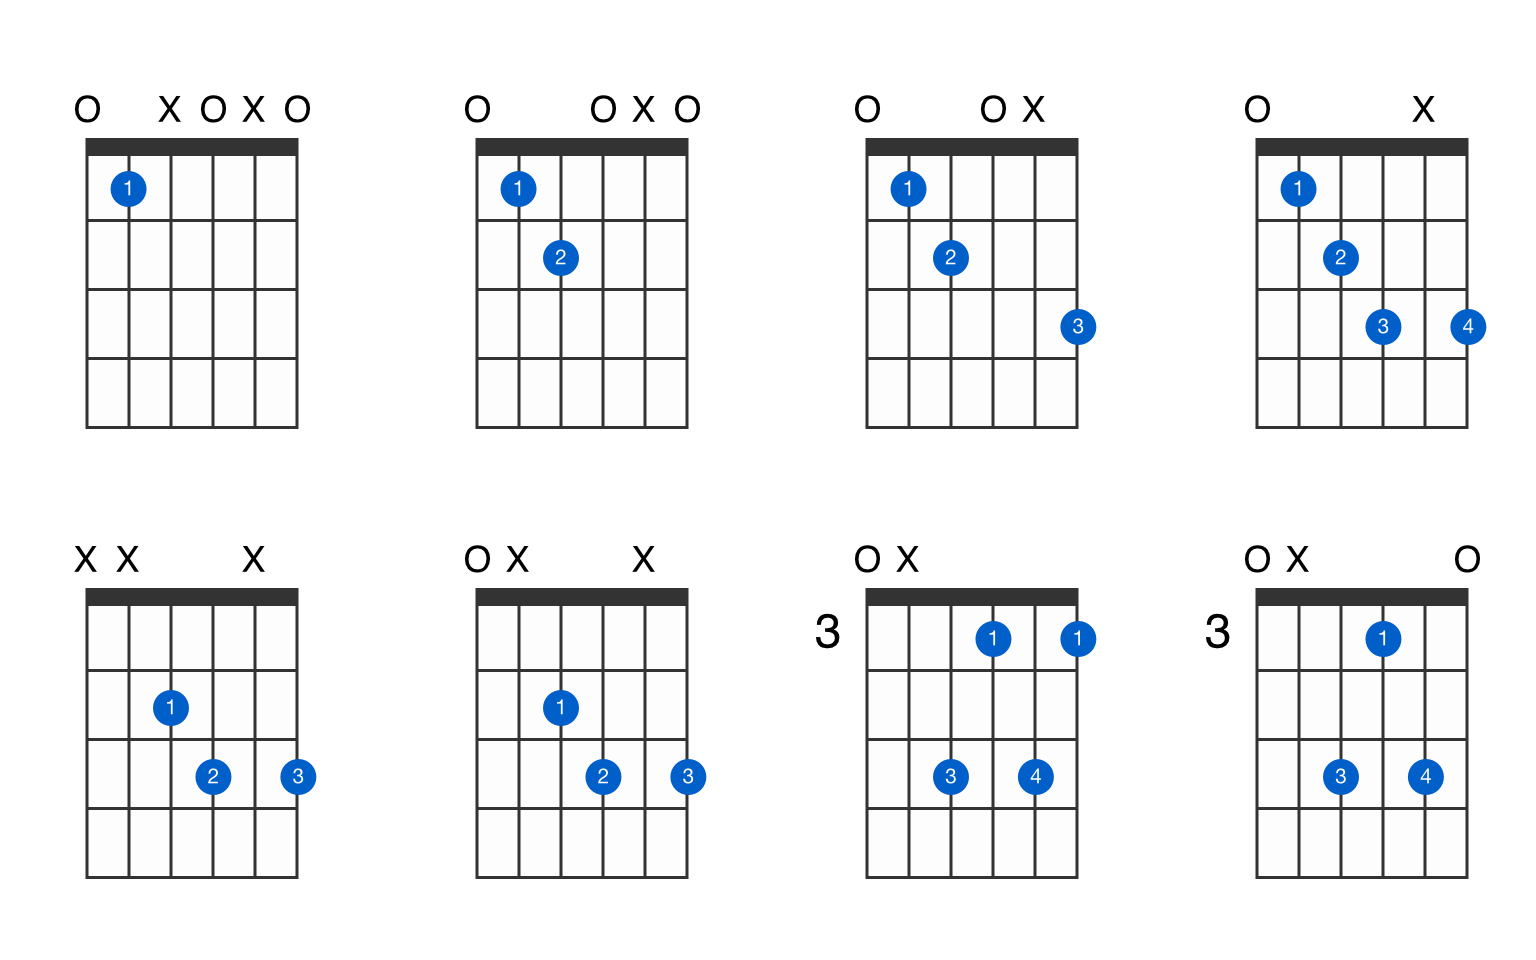 E diminished guitar chord is also written as Edim or Eo or Em♭5